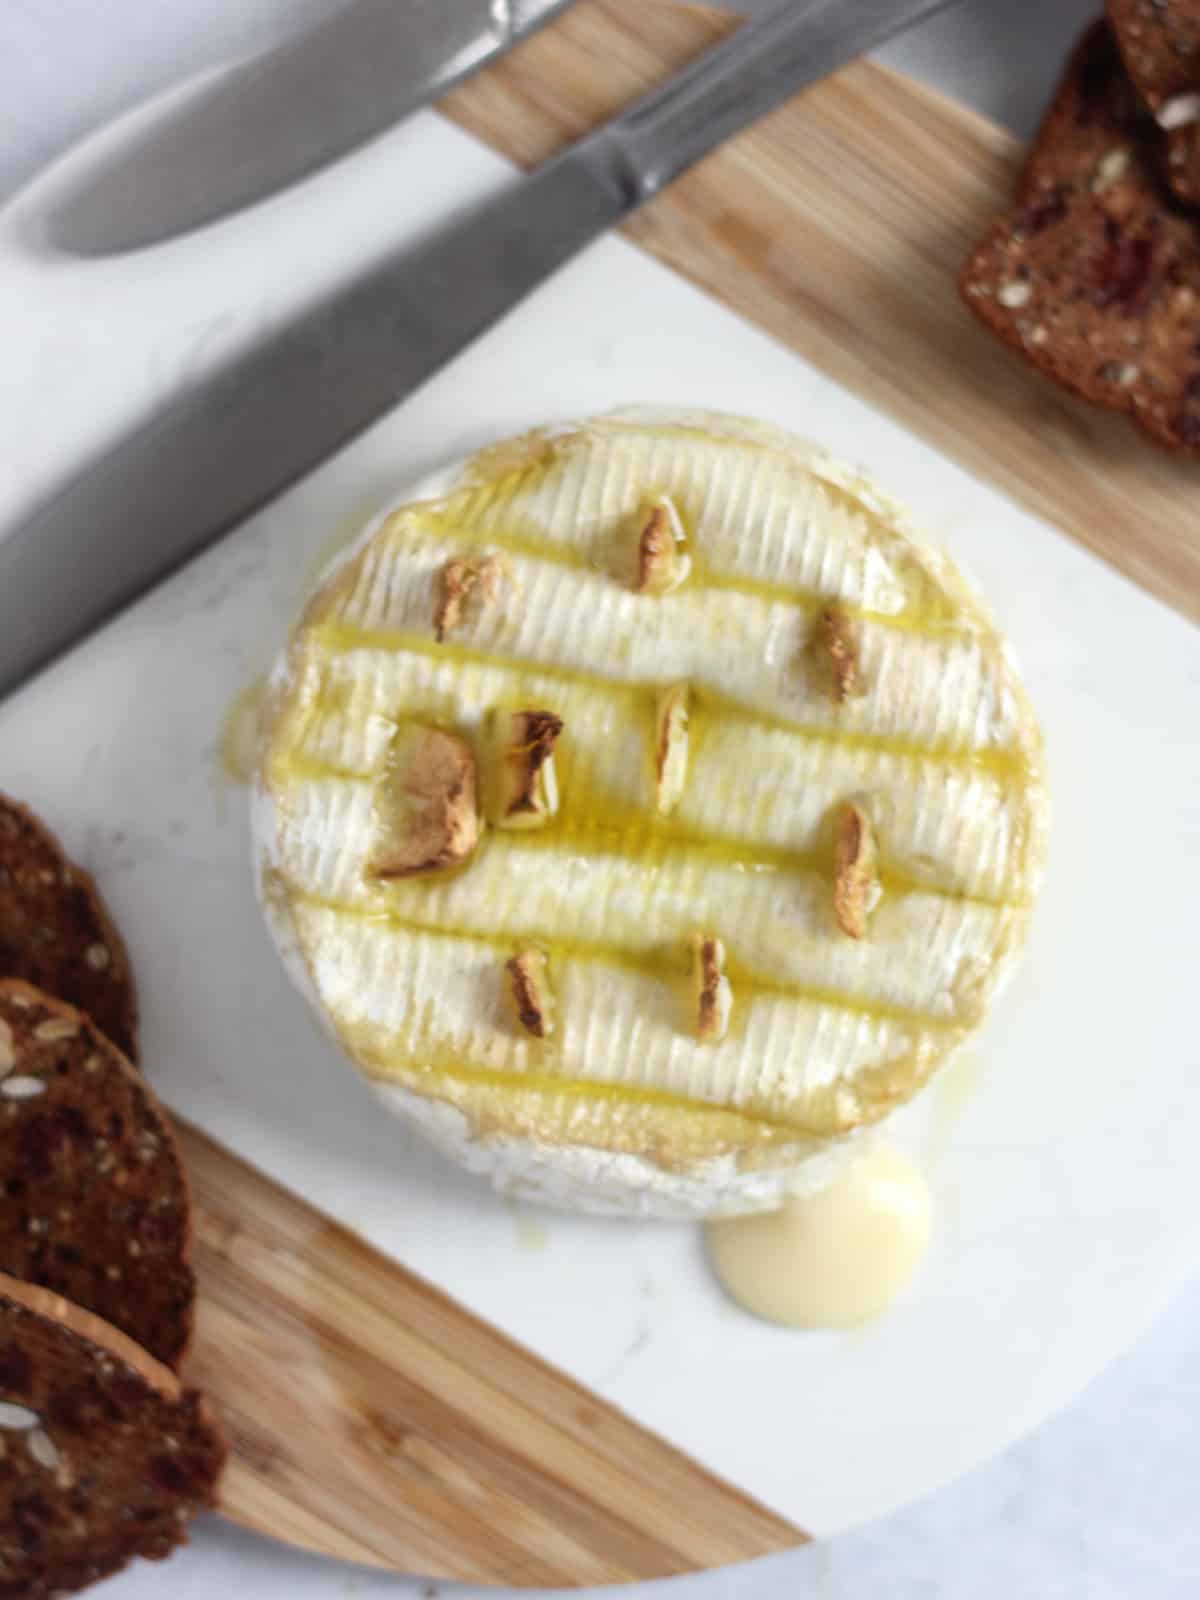 Air fryer baked camembert with slices of garlic.